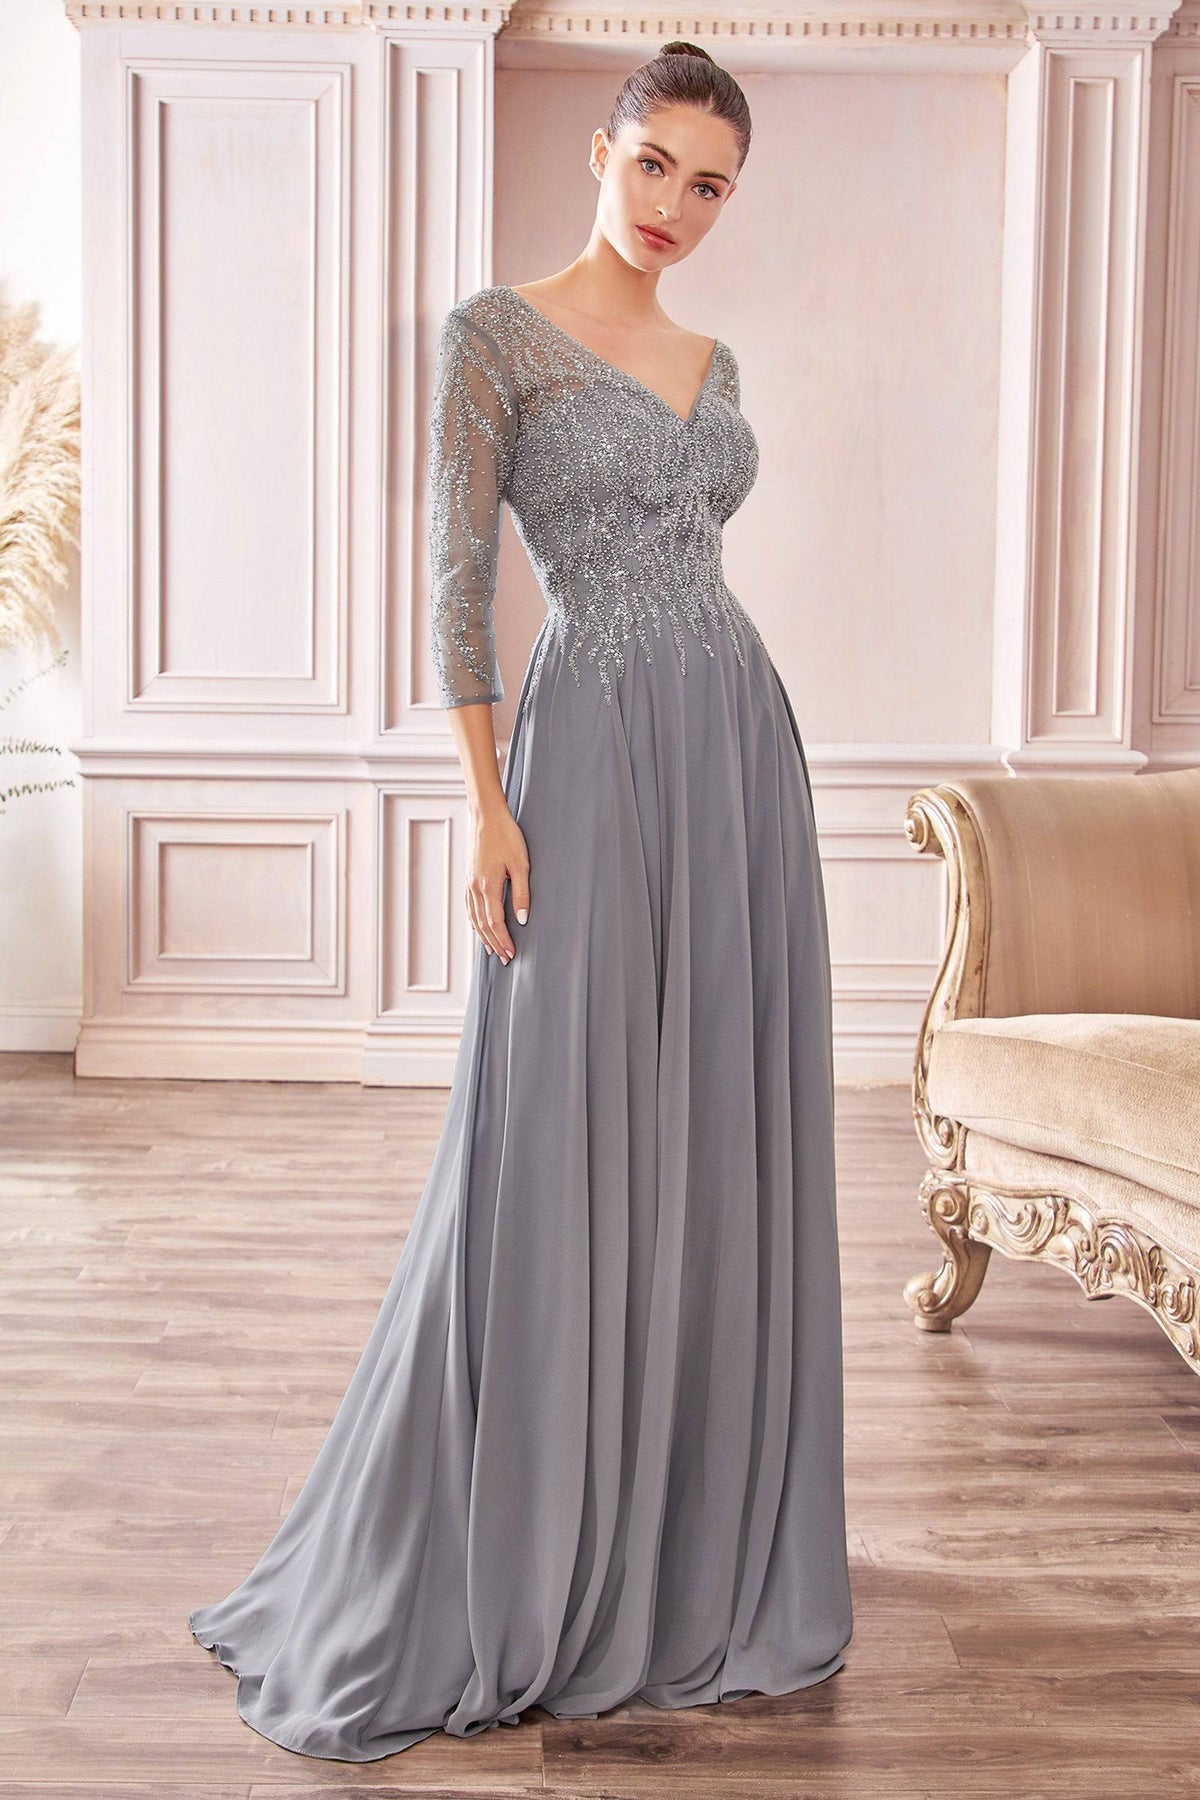 Gorgeous Long Sleeve Gown with Glitter Design on Bodice #CDCD0171 - NORMA REED